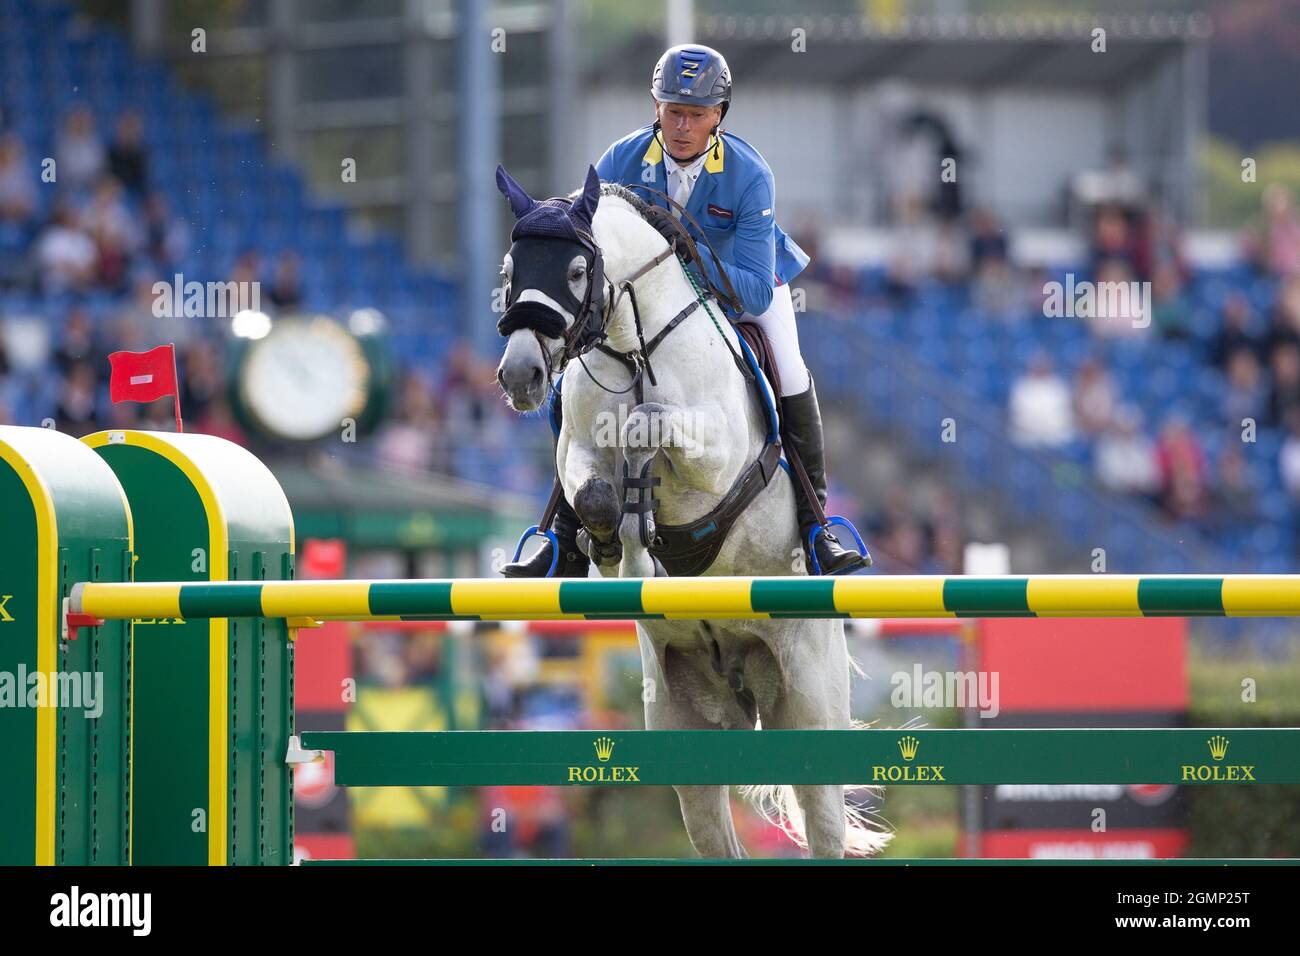 christian ahlmann ger on clintrexo z action in the 2nd round jumping s17 rolex grand prix jumping competition with two rounds and jump off on september 19 2021 world equestrian festival chio aachen 2021 from september 10 19 2021 in aachen germany 2GMP25T